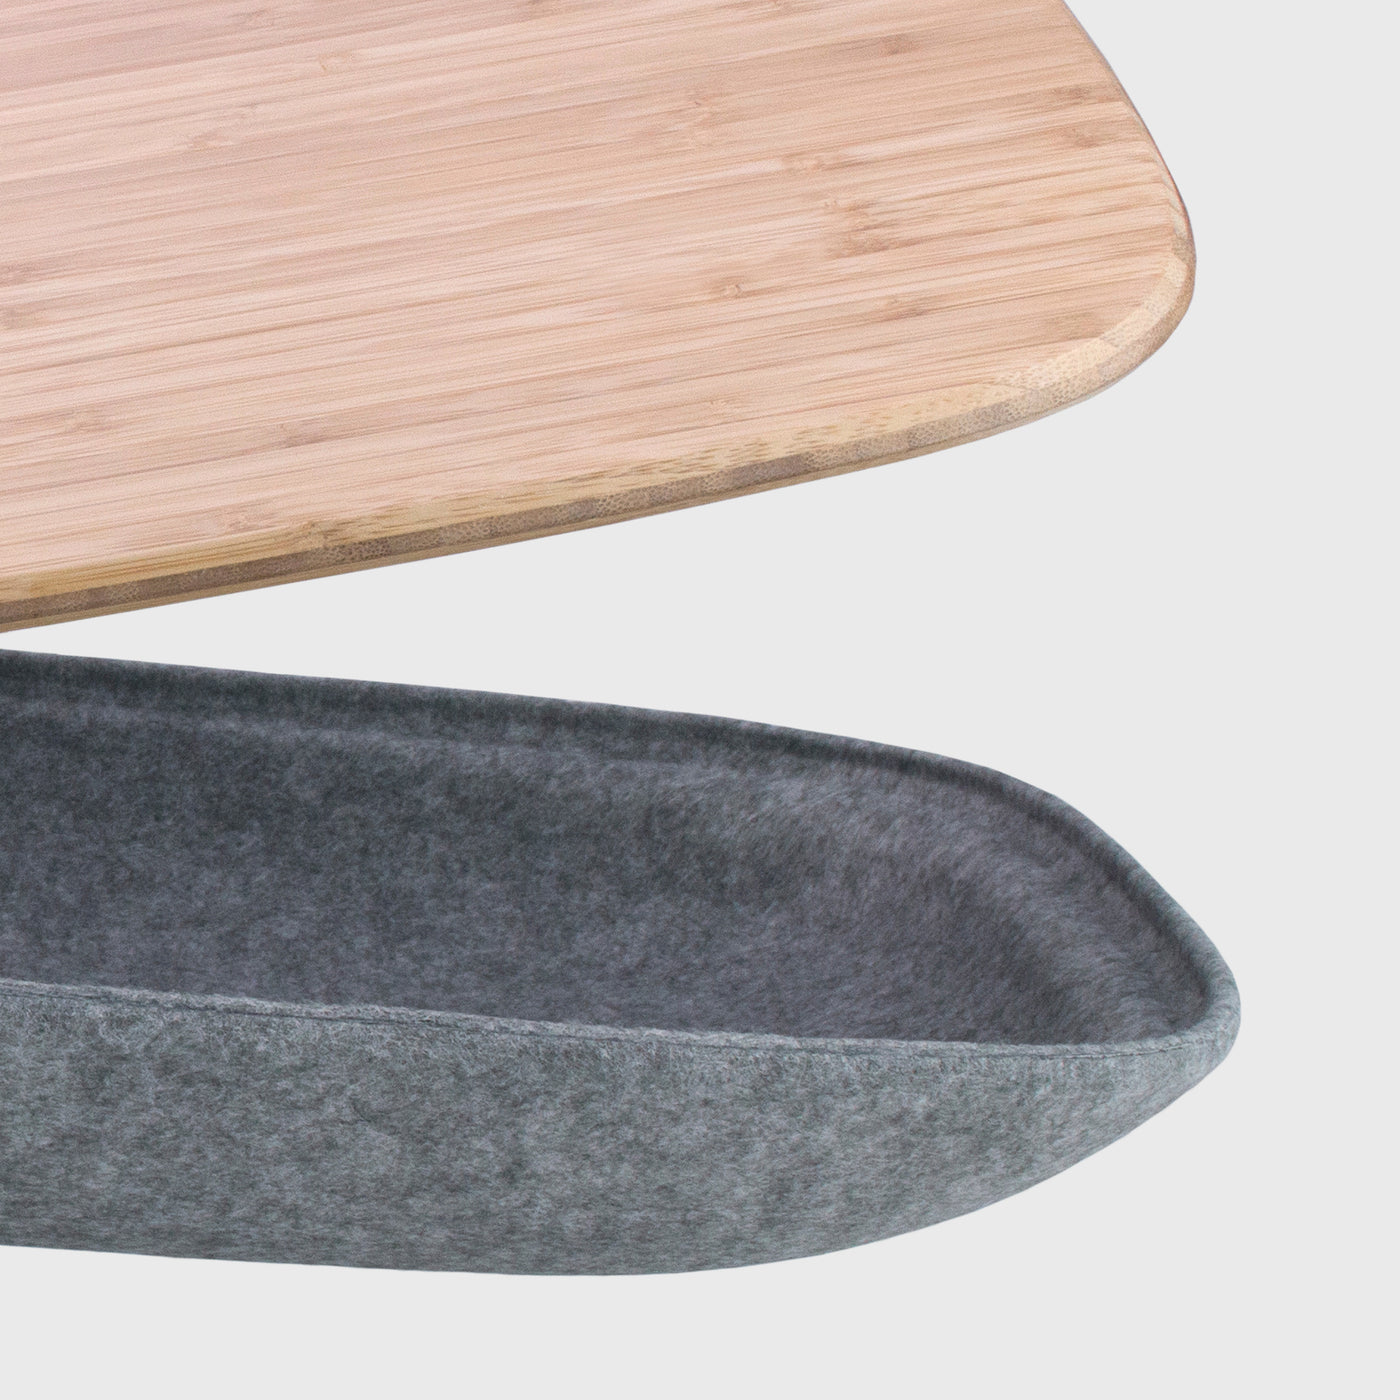 Detail of Lapod Lap Desk with Storage showing closeup of bamboo lap tray, right side. PET felt is Ash grey color.